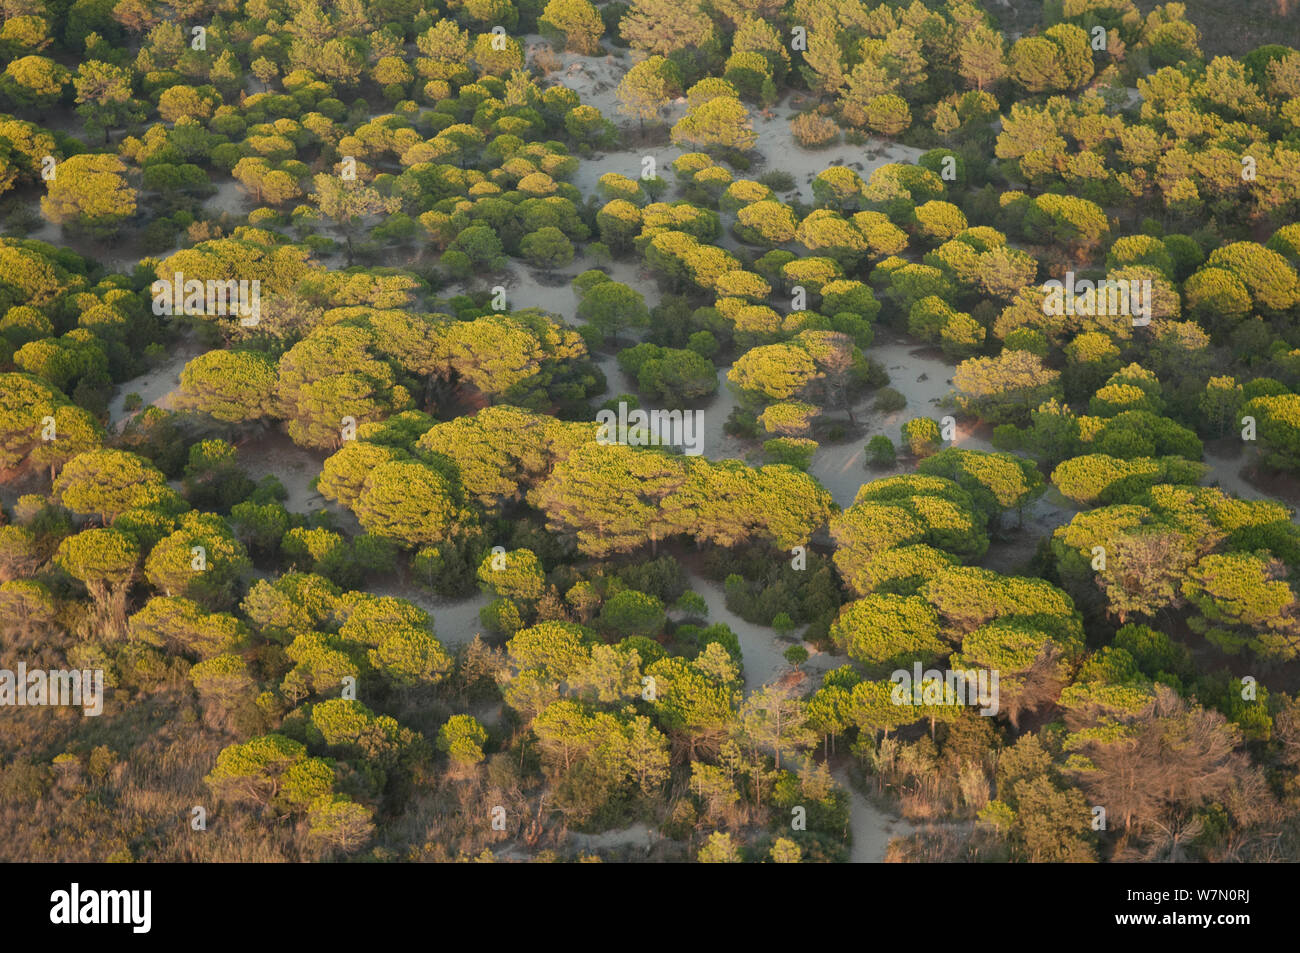 Aerial view of pine forest (Pinus sp) in Petite Camargue, Sainte Maries de la Mer, Camargue, Southern France, September 2008 Stock Photo